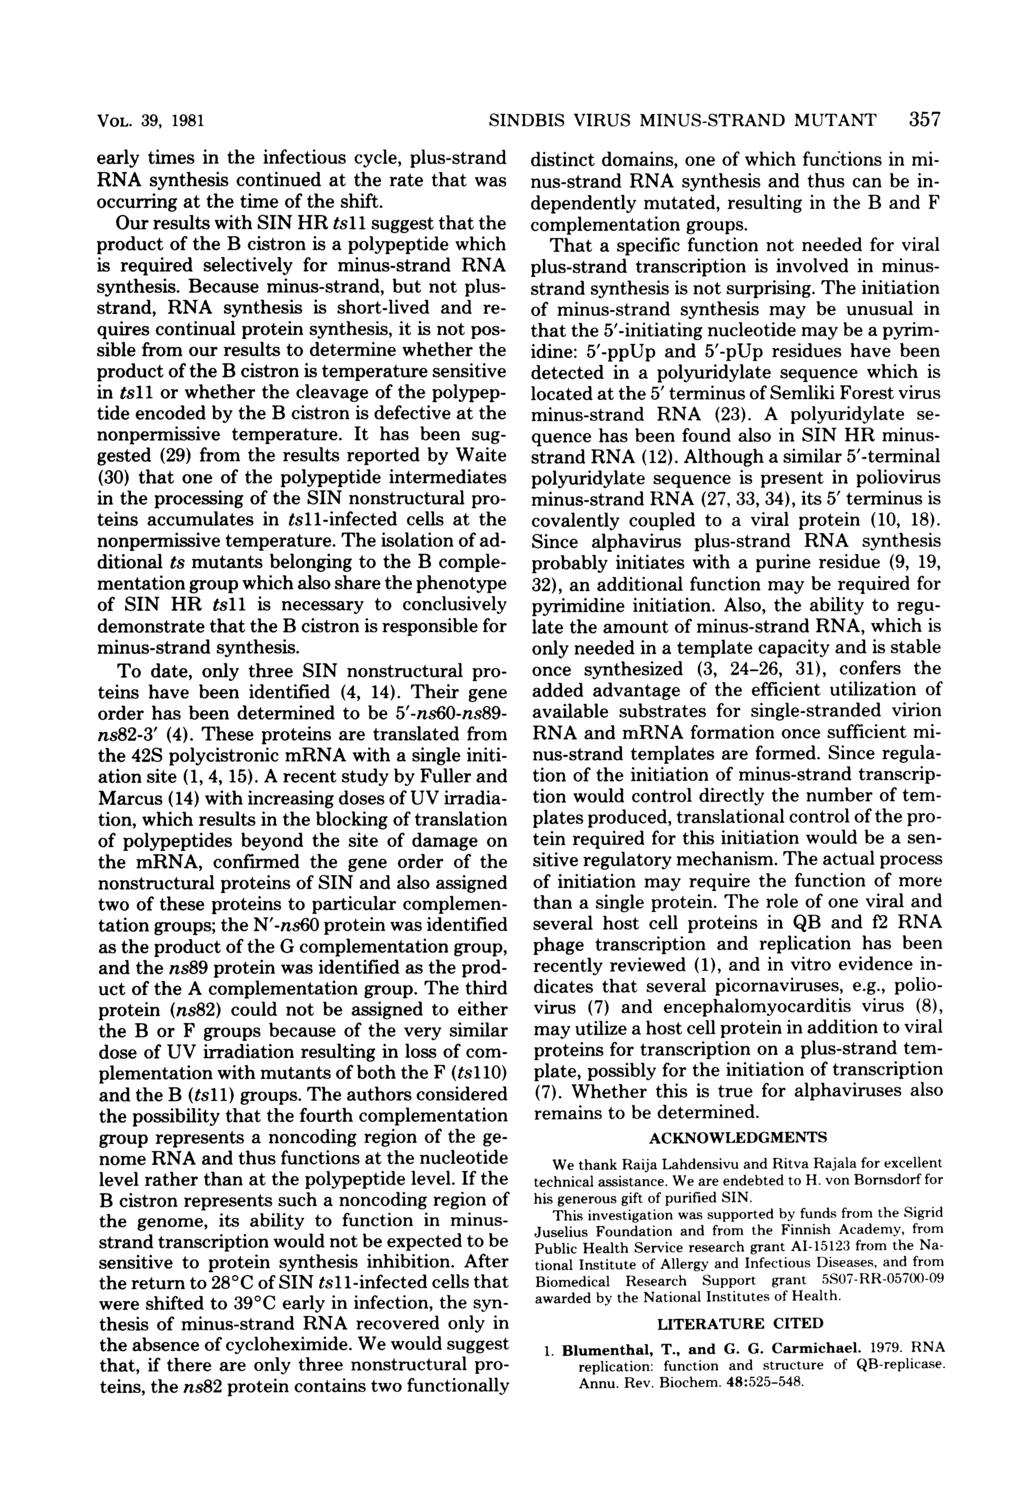 VOL. 39, 1981 early times in the infectious cycle, plus-strand RNA synthesis continued at the rate that was occurring at the time of the shift.